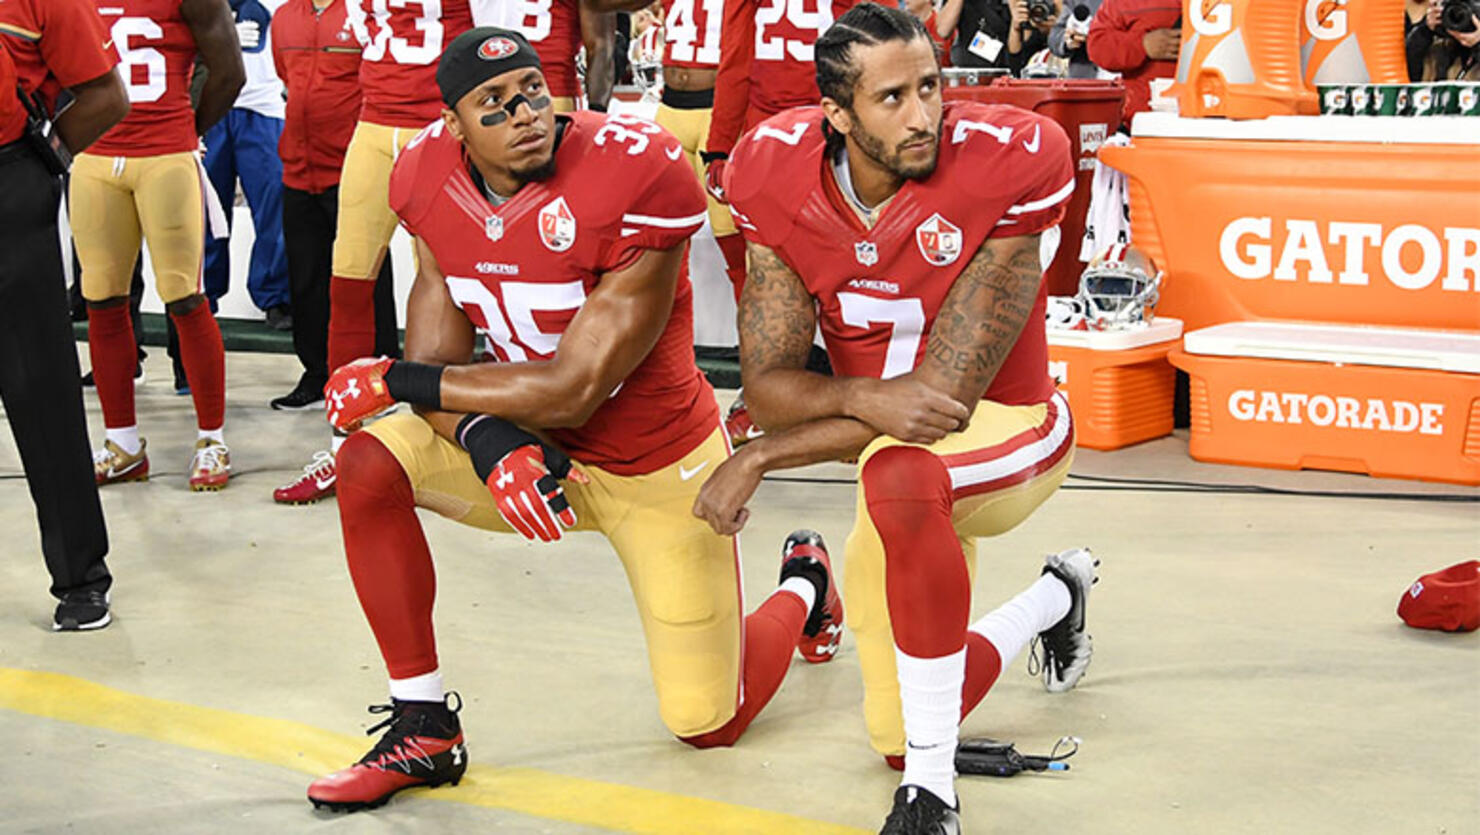 Colin Kaepernick #7 and Eric Reid #35 of the San Francisco 49ers kneel in protest during the national anthem prior to playing the Los Angeles Rams in their NFL game at Levi's Stadium